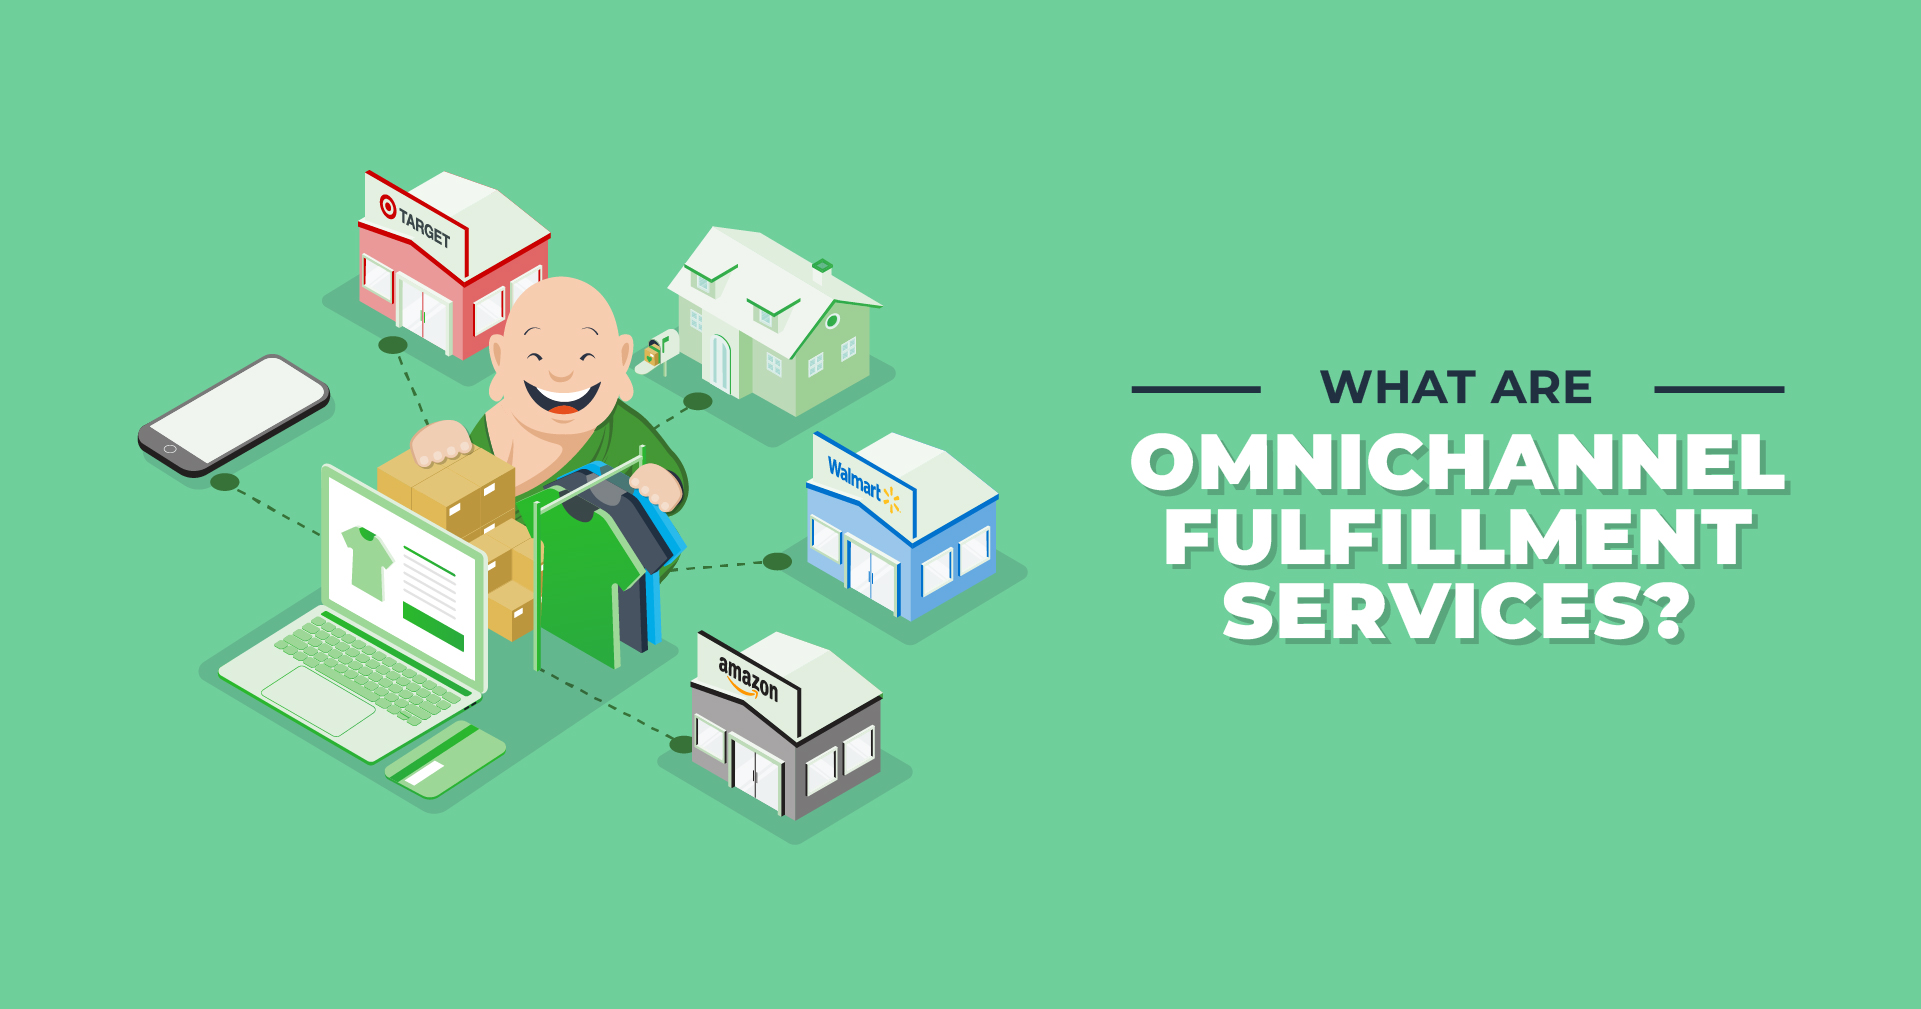 What are omnichannel fulfillment services?